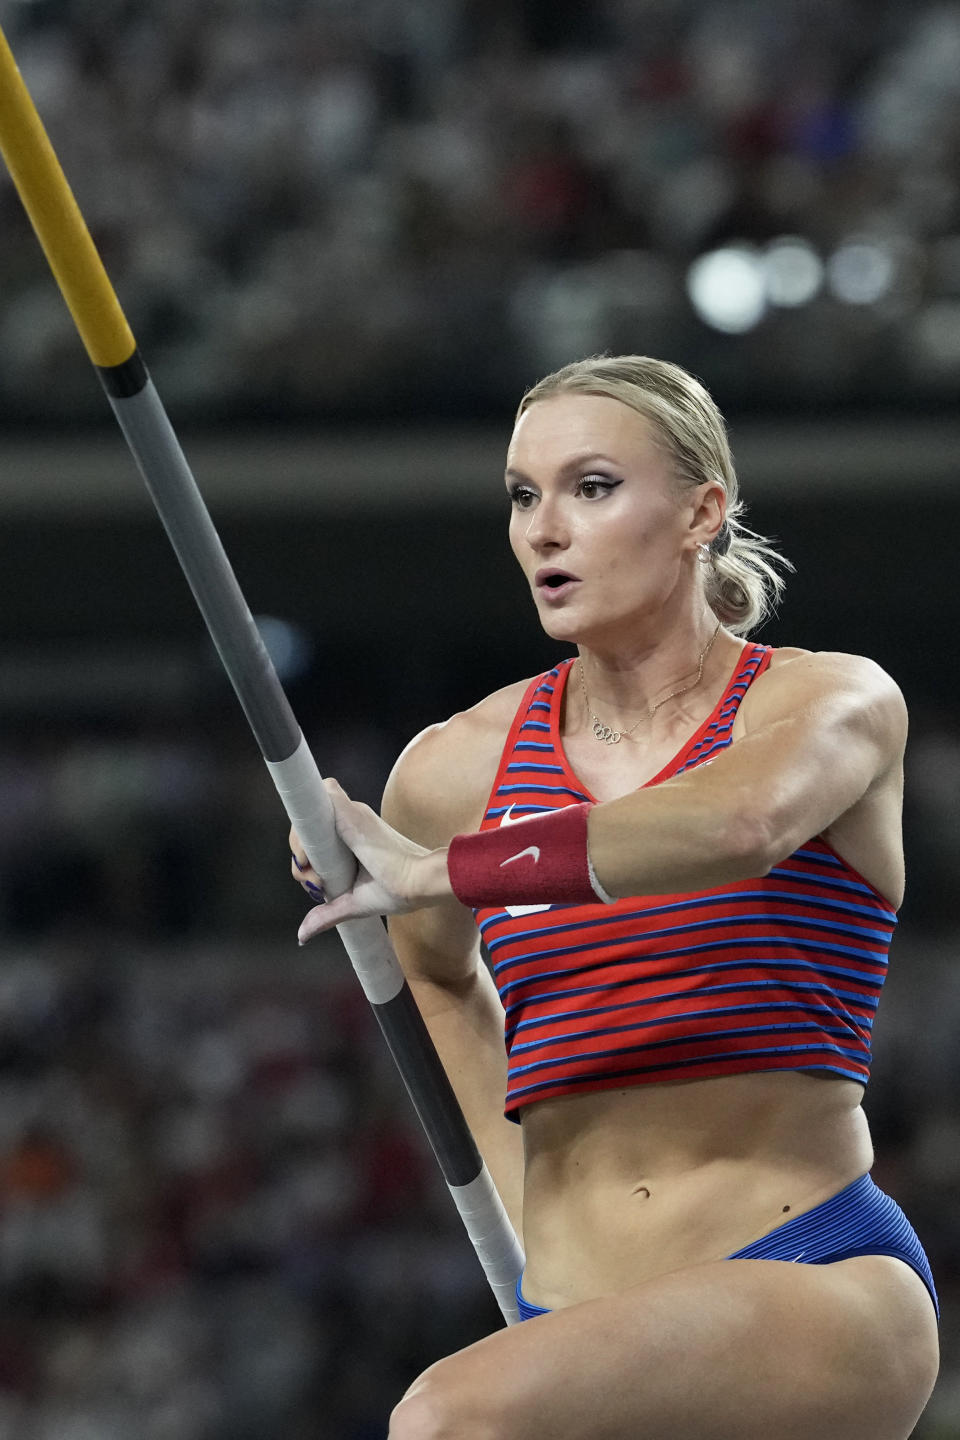 Katie Moon, of the United States, makes an attempt in the Women's pole vault final during the World Athletics Championships in Budapest, Hungary, Wednesday, Aug. 23, 2023. (AP Photo/Bernat Armangue)